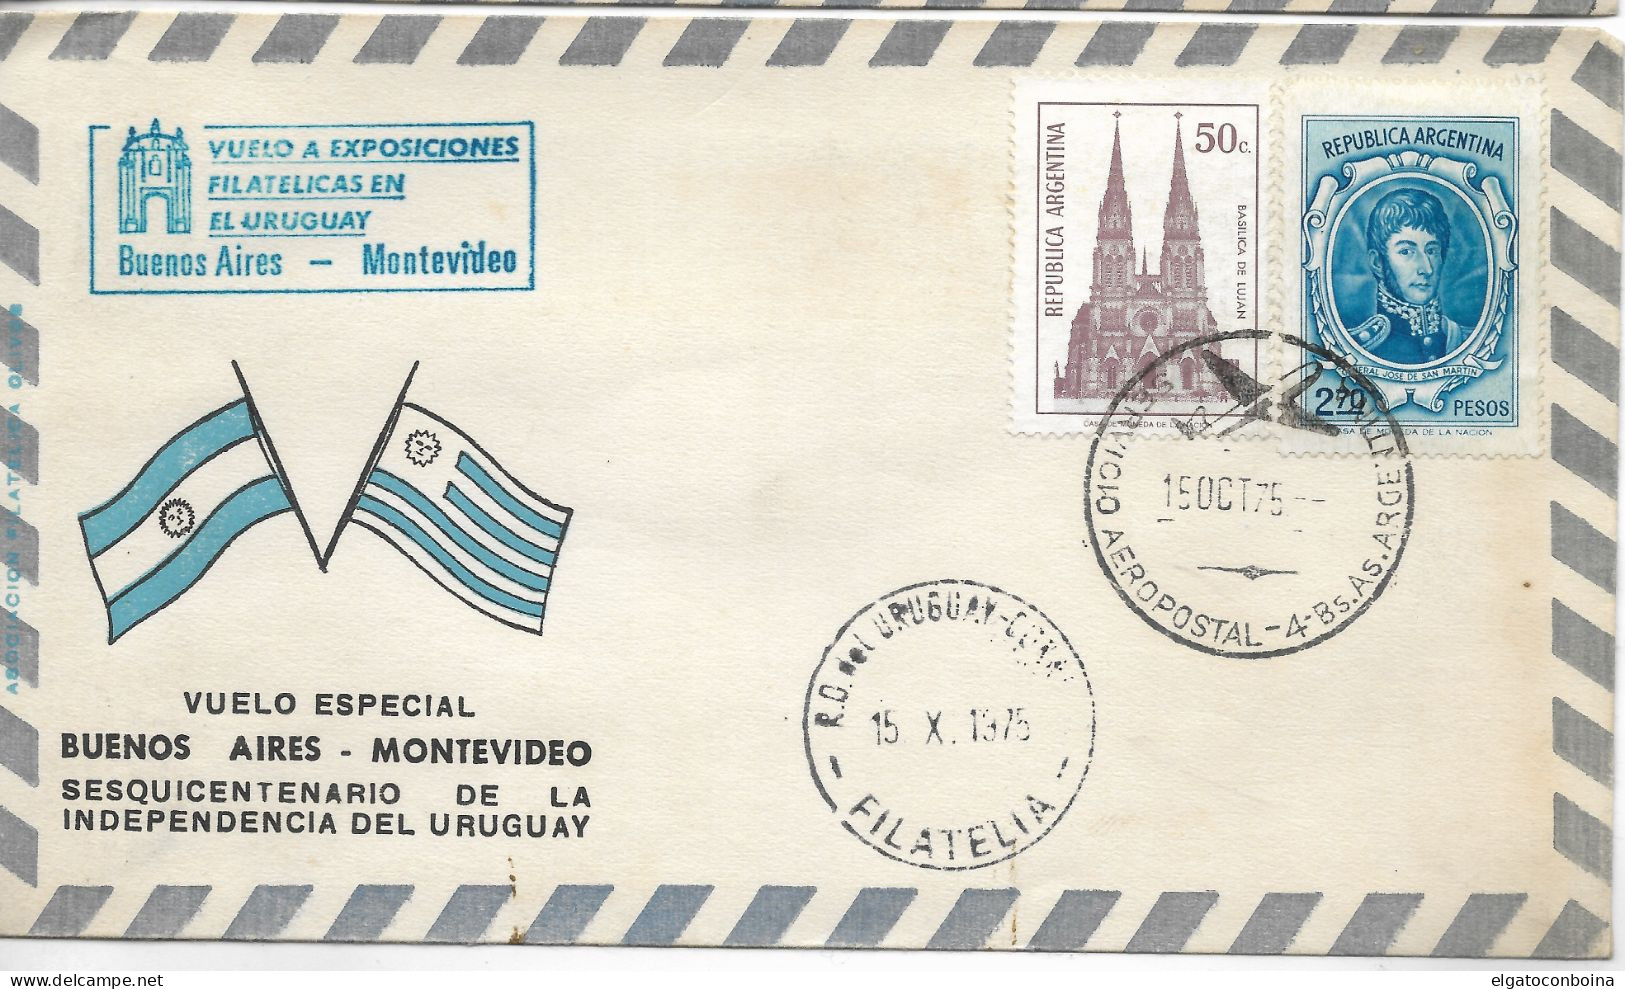 ARGENTINA 1975 SPECIAL FLIGHT BUENOS AIRES- MONTEVIDEO URUGUAYAN INDEPENDENCE - FDC